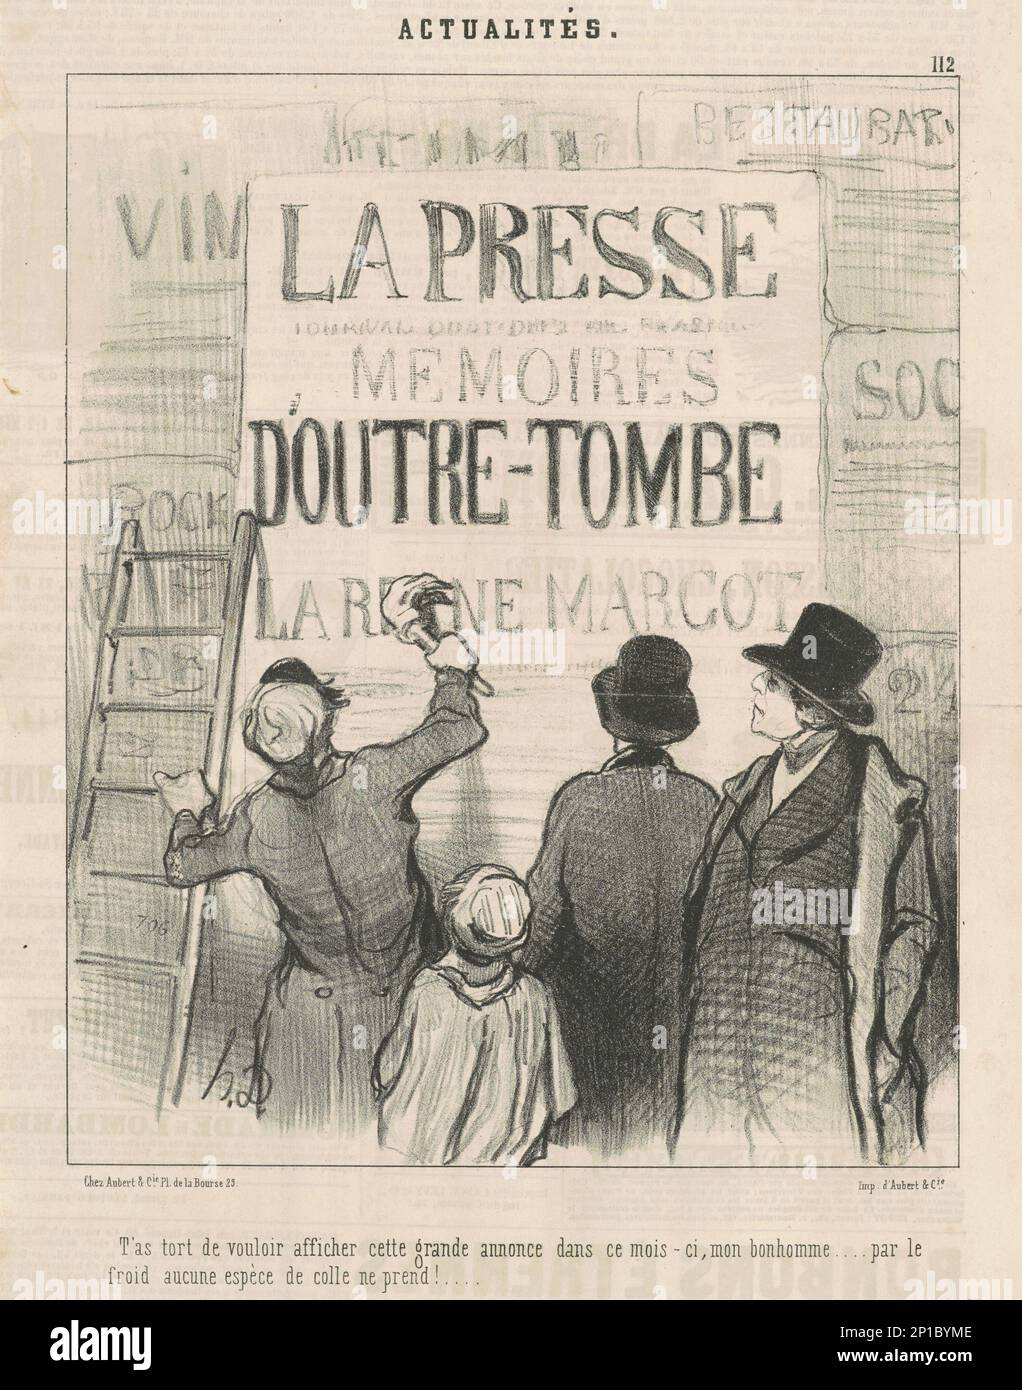 T'as tort de vouloir afficher cette cette grande annonce ..., 19th century. [Poster: 'Press - Memories from Beyond the Grave' - announcing the publication of the novel &quot;La Reine Margot&quot; by Alexandre Dumas?]. You shouldn't be sticking up this big notice this month, my good man...glue won't stick in the cold! Stock Photo